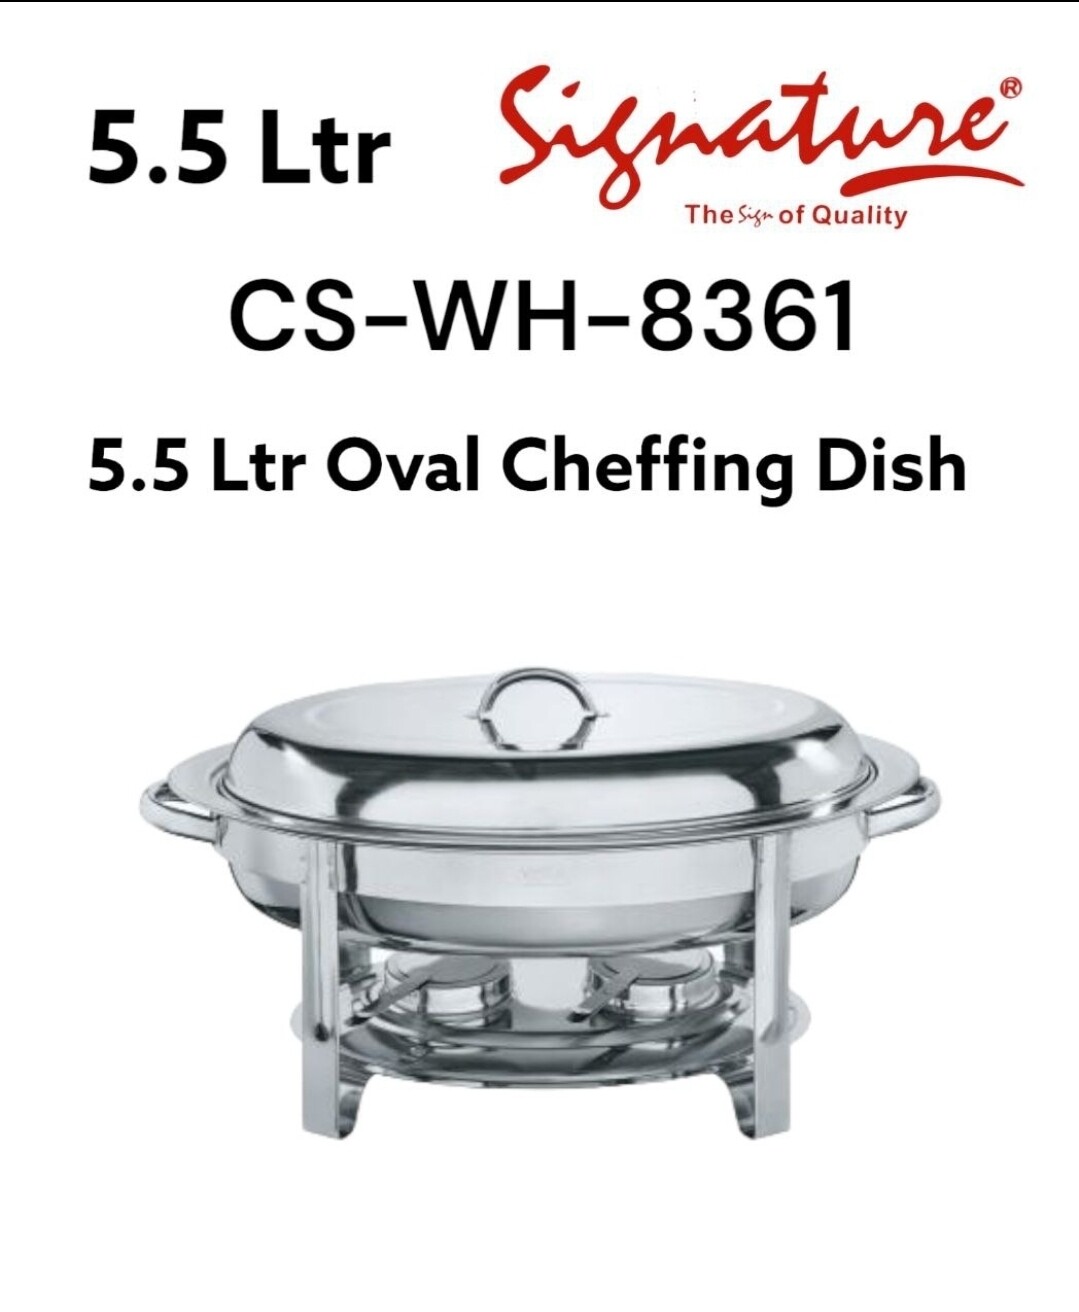 Signature 5.5 Ltr Oval Cheffing Dish Single Compartment CS-WH-8361